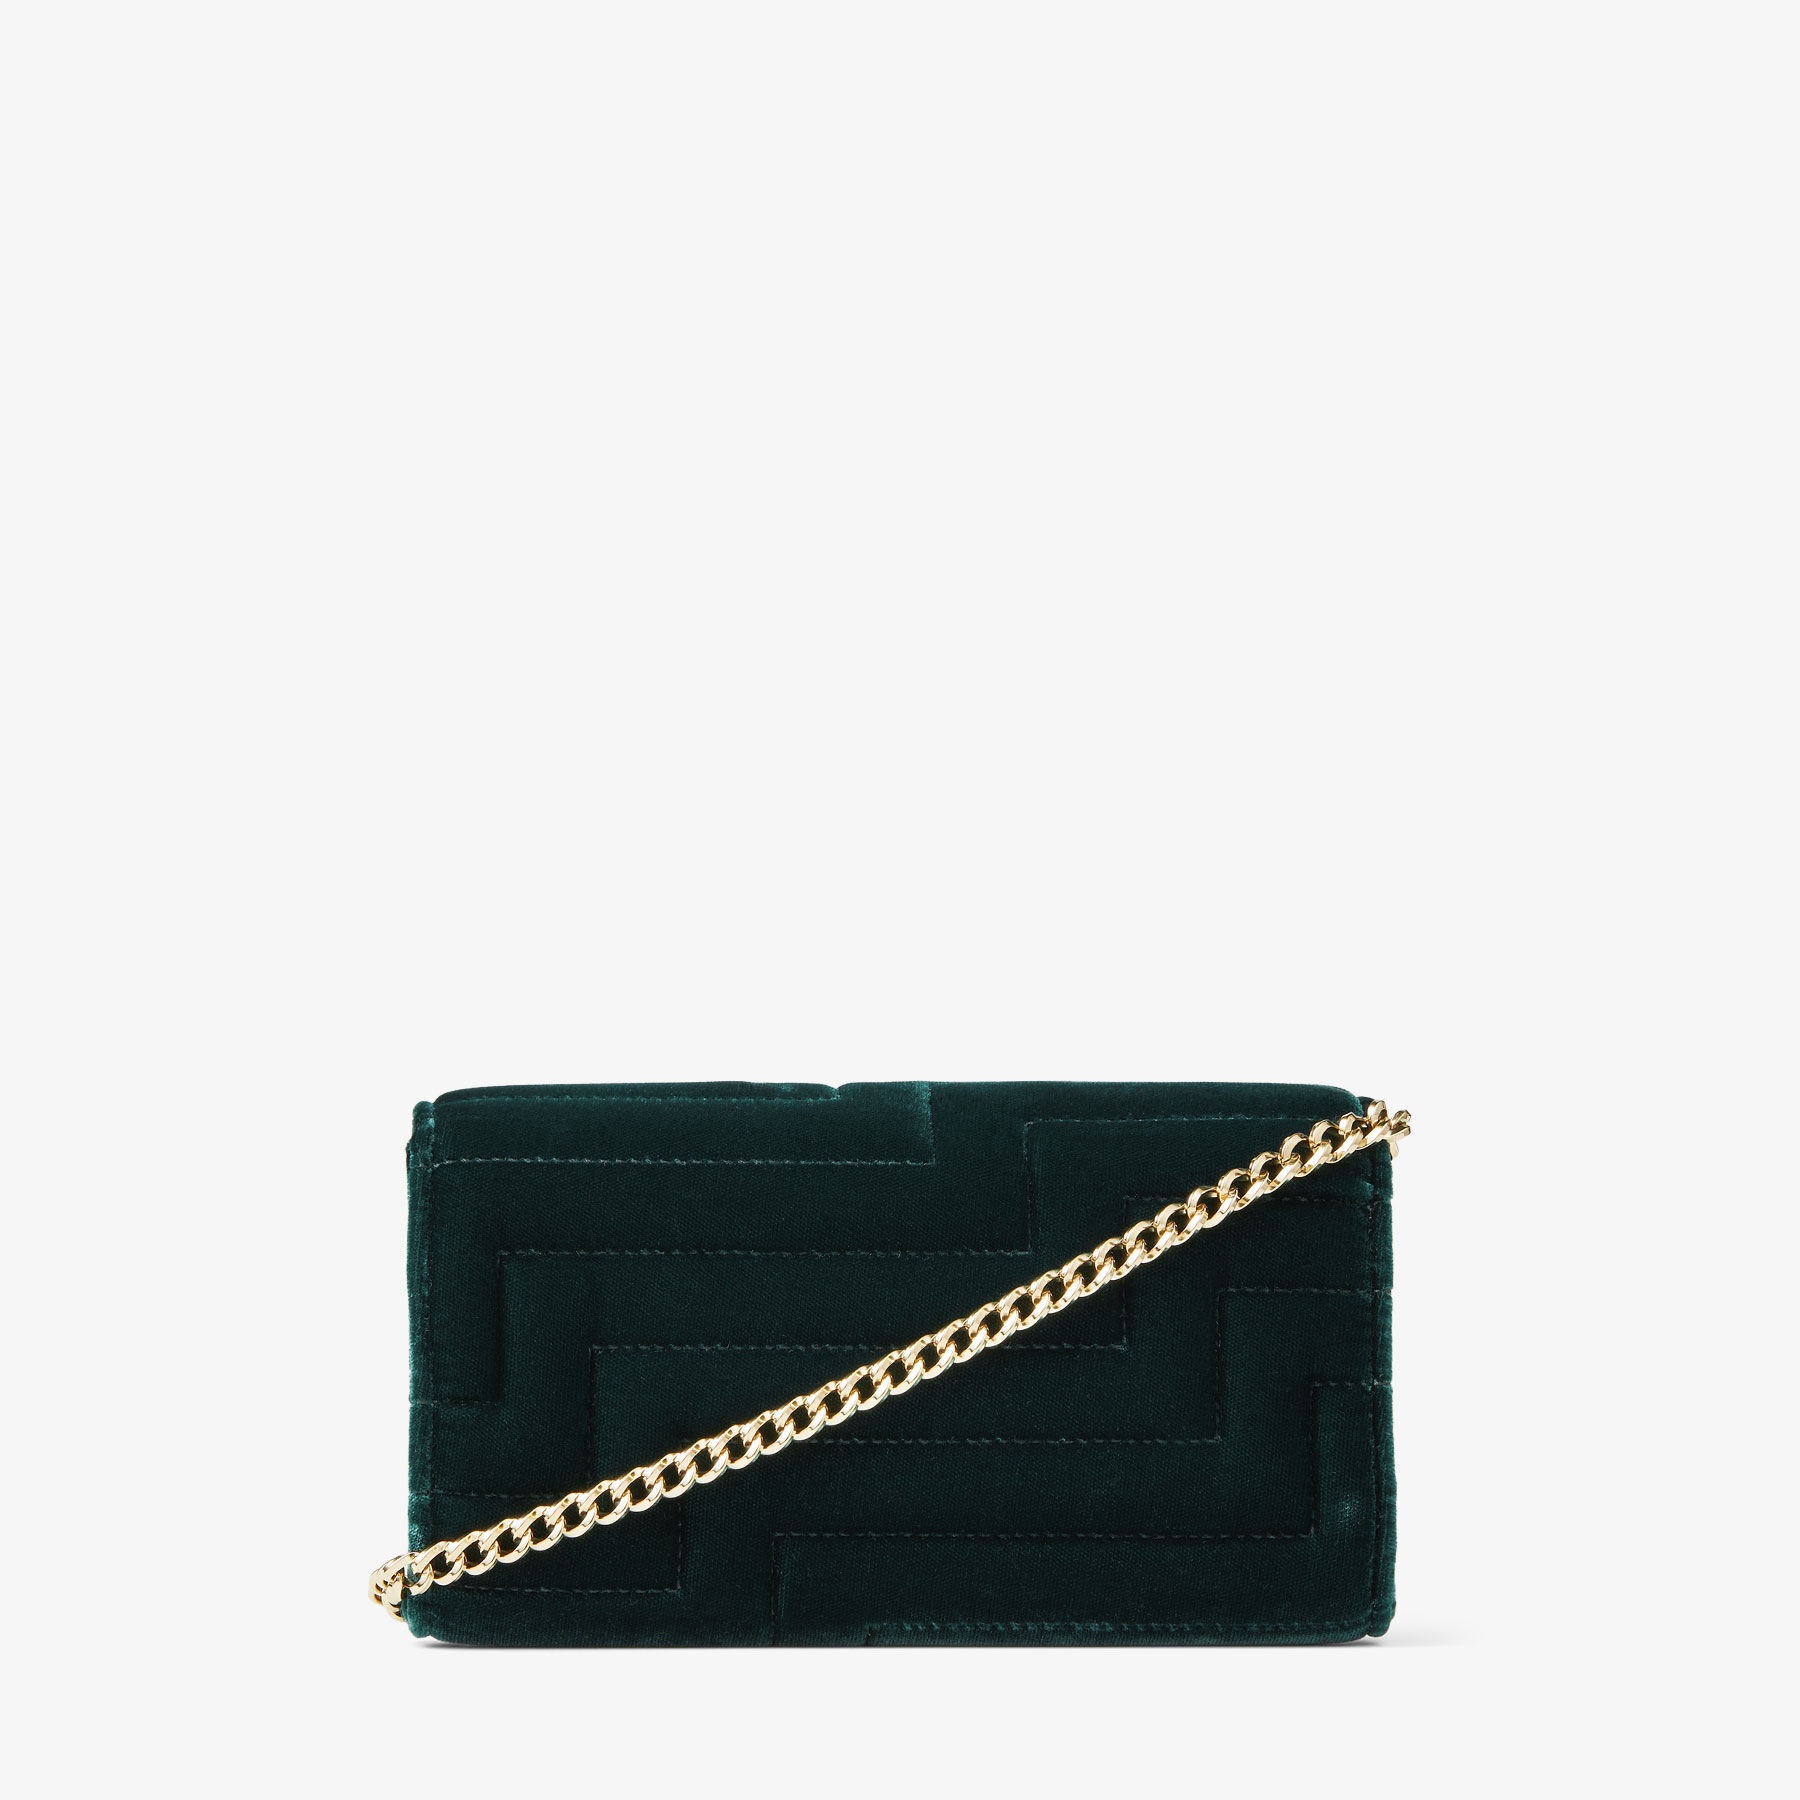 Avenue Wallet with Chain
Dark Green Avenue Velvet Wallet with Chain - 5